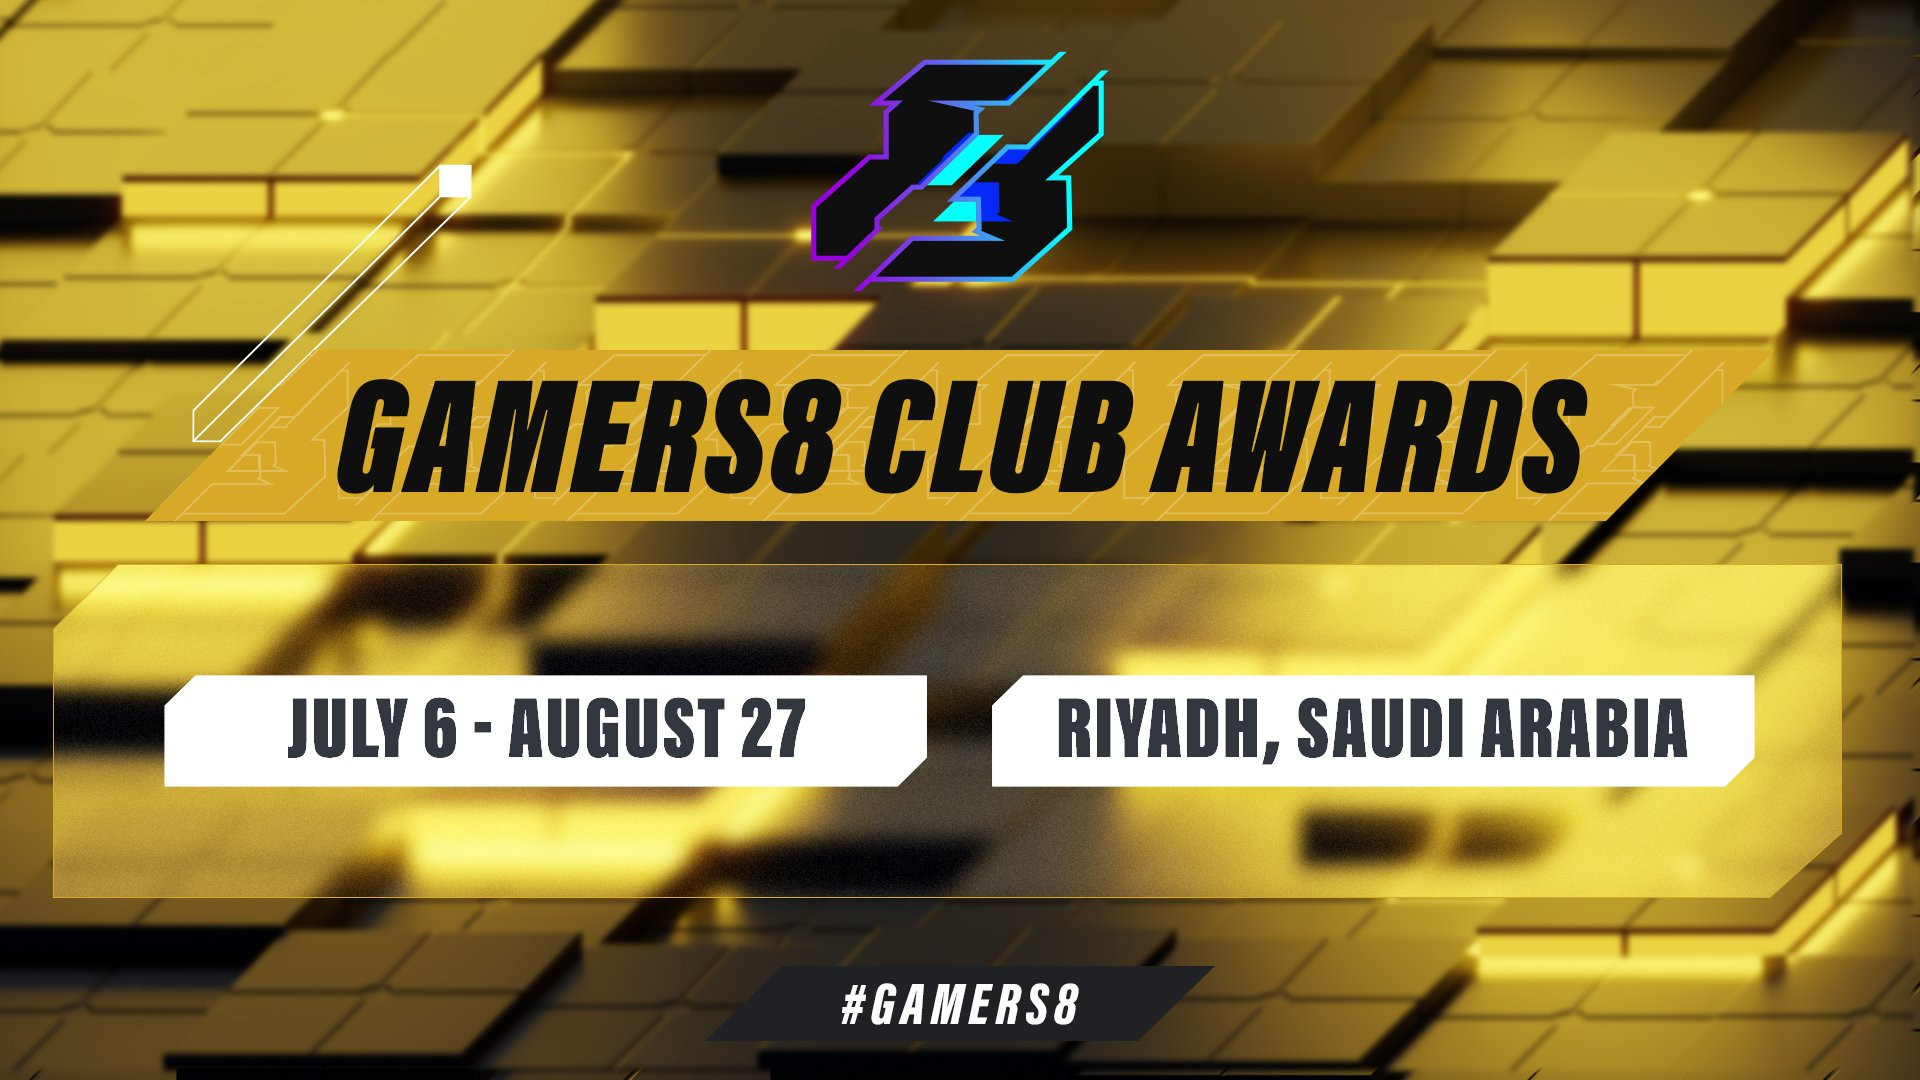 The $5 million Gamers8 Club Awards is set to rewards clubs for success across multiple titles at the Gamers8 festival ©Gamers8